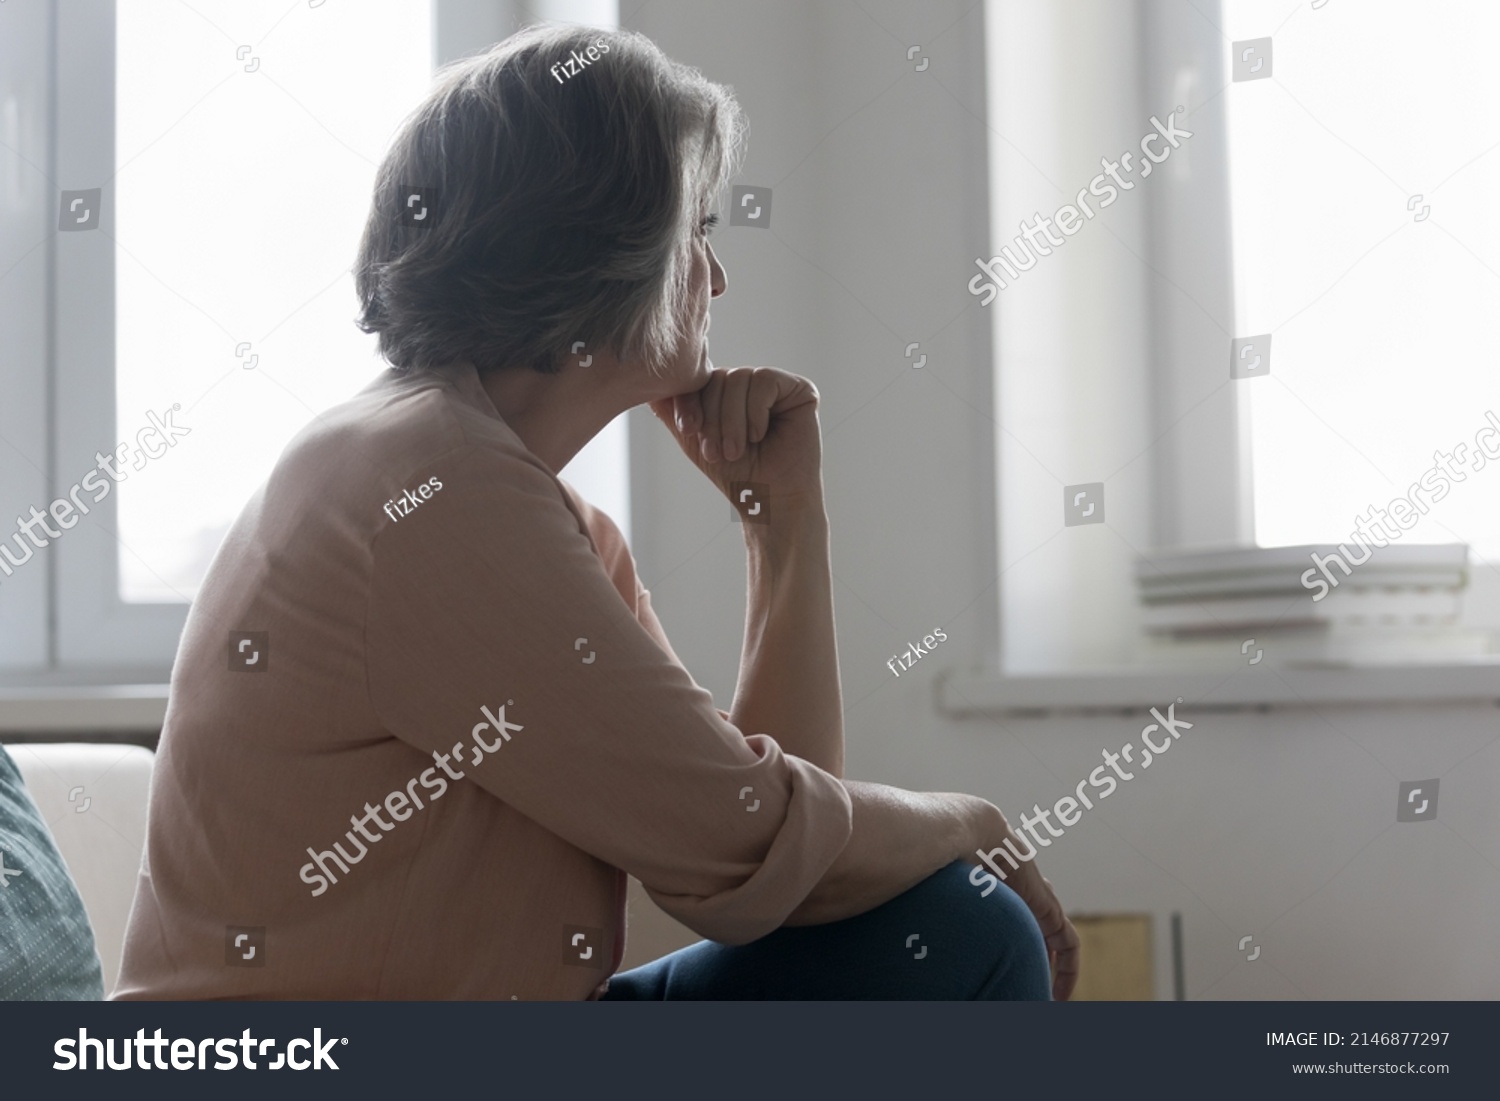 Serious older 50s woman looks out window spend time alone at home, feels sad or disappointed, waits or misses someone seated on sofa indoor. Loneliness, solitude on retirement, nostalgic mood concept #2146877297